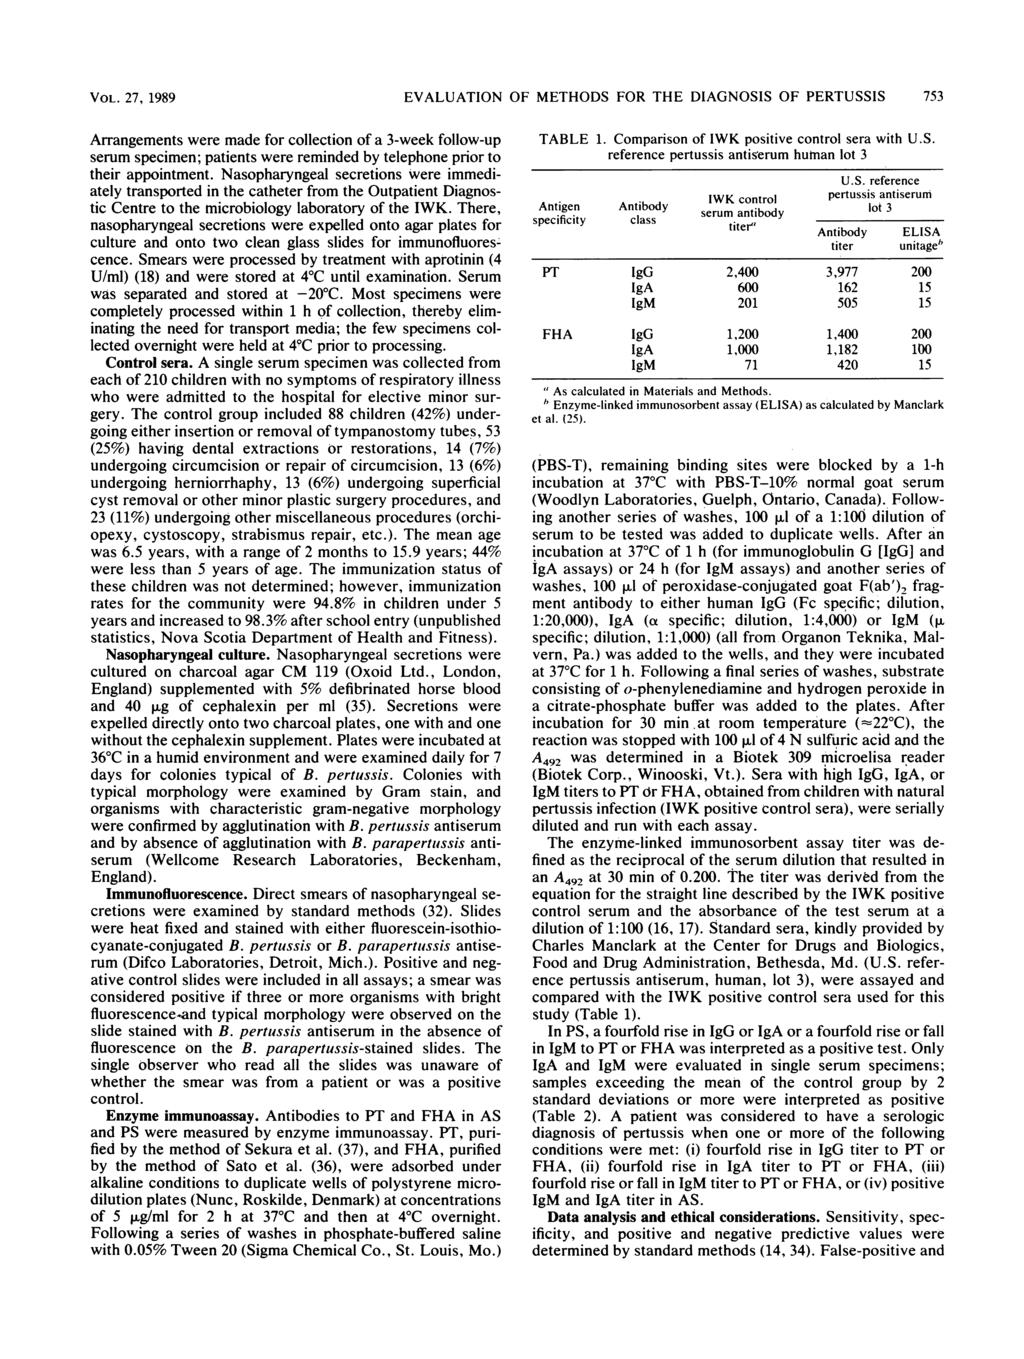 VOL. 27, 1989 EVALUATION OF METHODS FOR THE DIAGNOSIS OF PERTUSSIS 753 Arrangements were made for collection of a 3-week follow-up serum specimen; patients were reminded by telephone prior to their